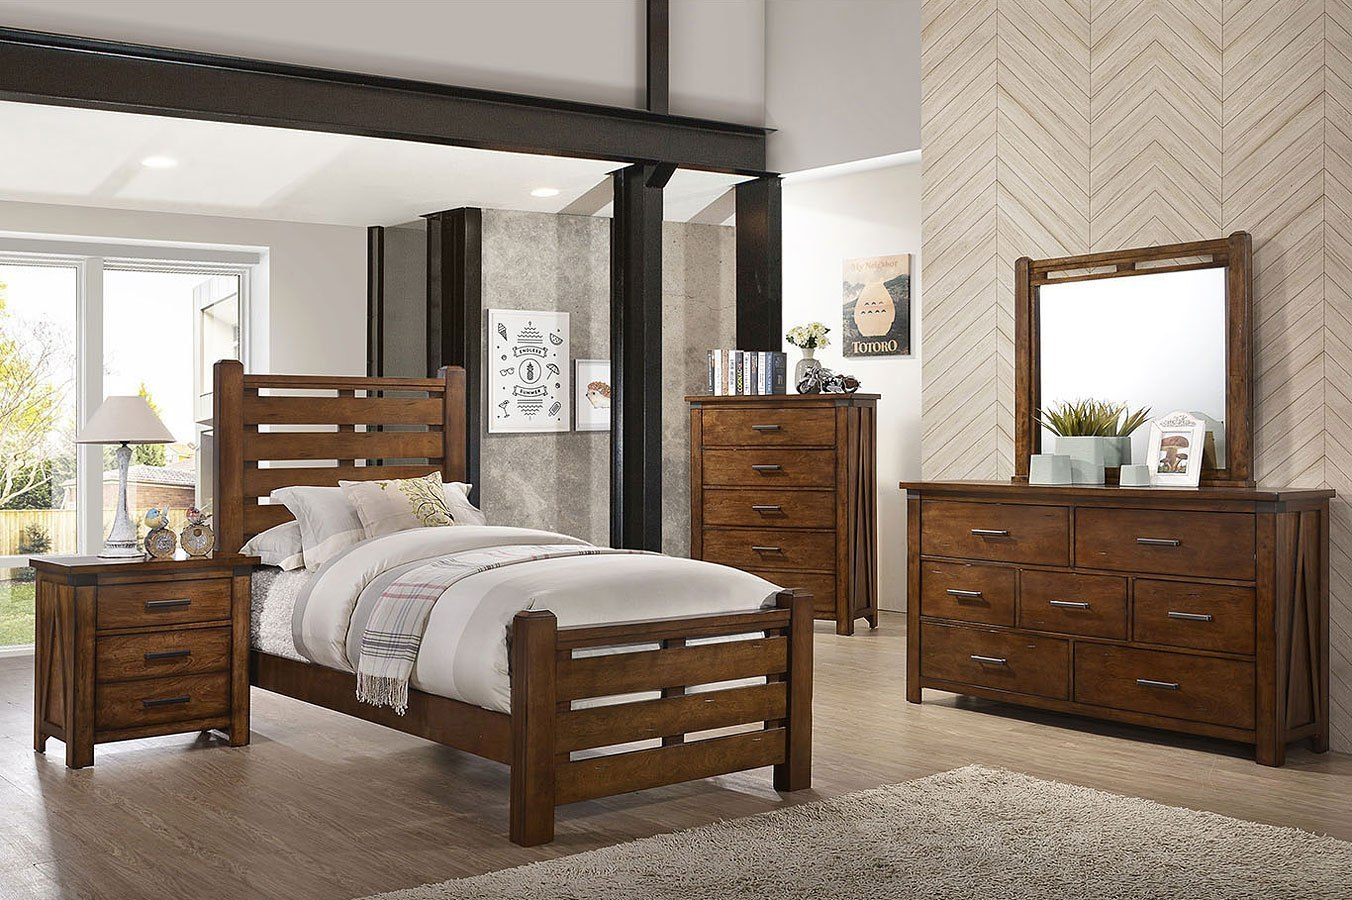 Logan Youth Panel Bedroom Set pertaining to measurements 1352 X 900